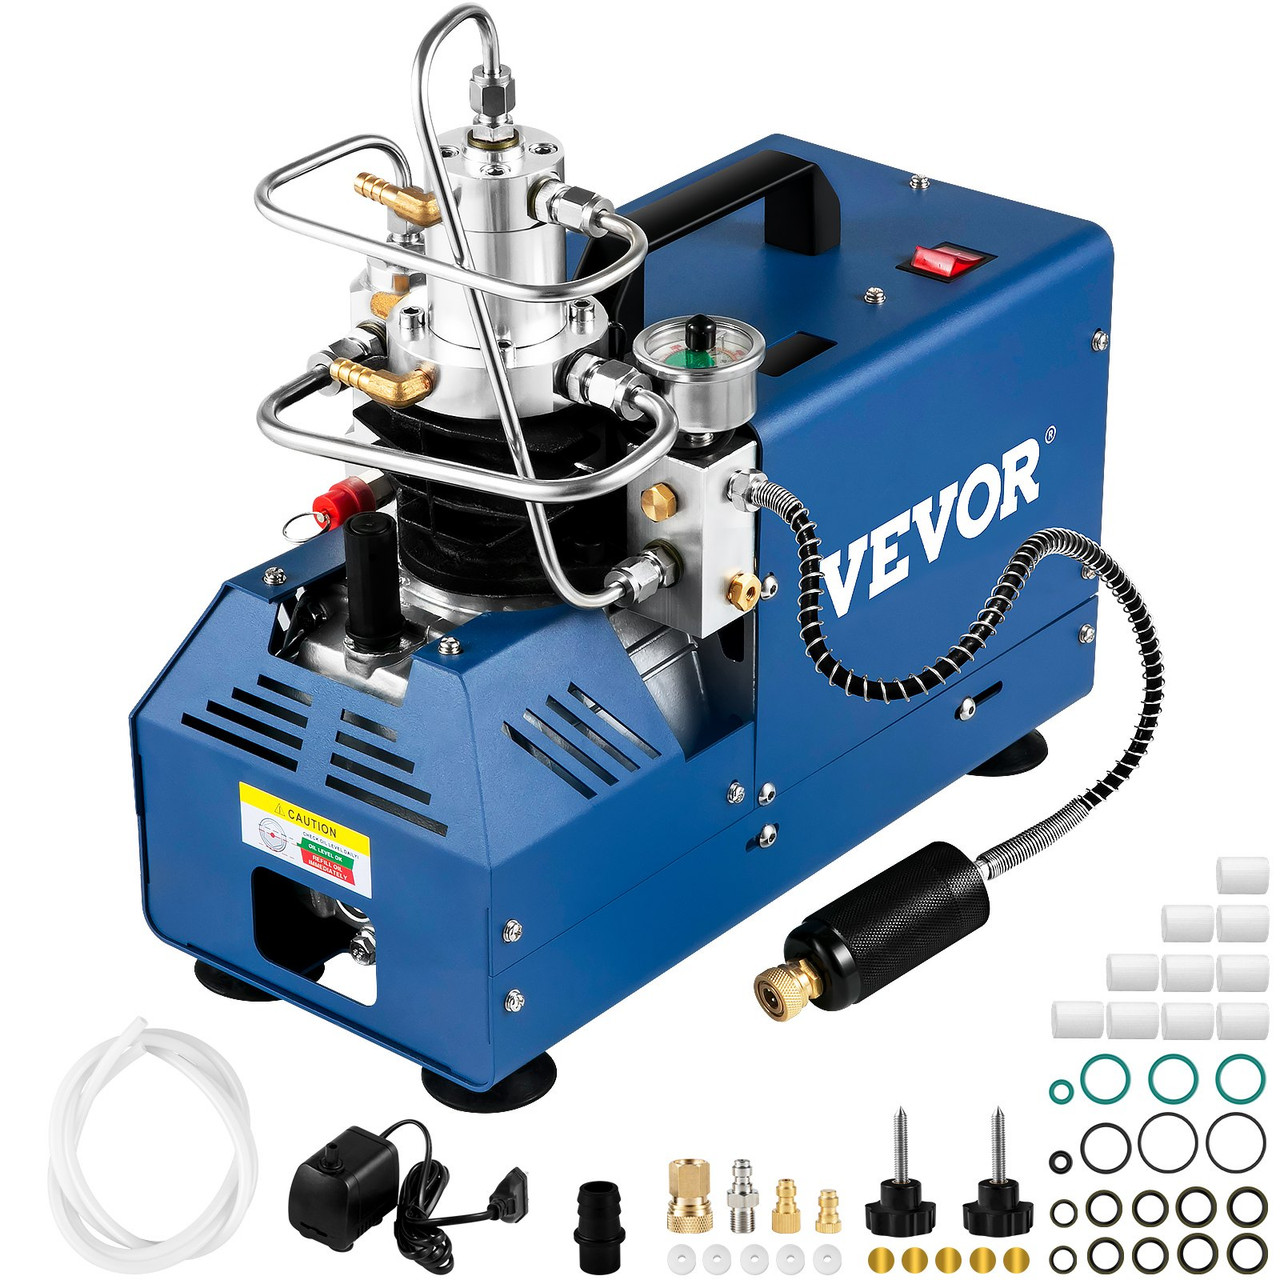 VEVOR PCP Air Compressor, Auto-stop Powered by DC 12V Car or Home AC  110V/220V, 4500Psi/30Mpa/300Bar w/Built-in Water/Oil Adapter & Cooling Fan  for Paintball, Scuba, Air Rifle